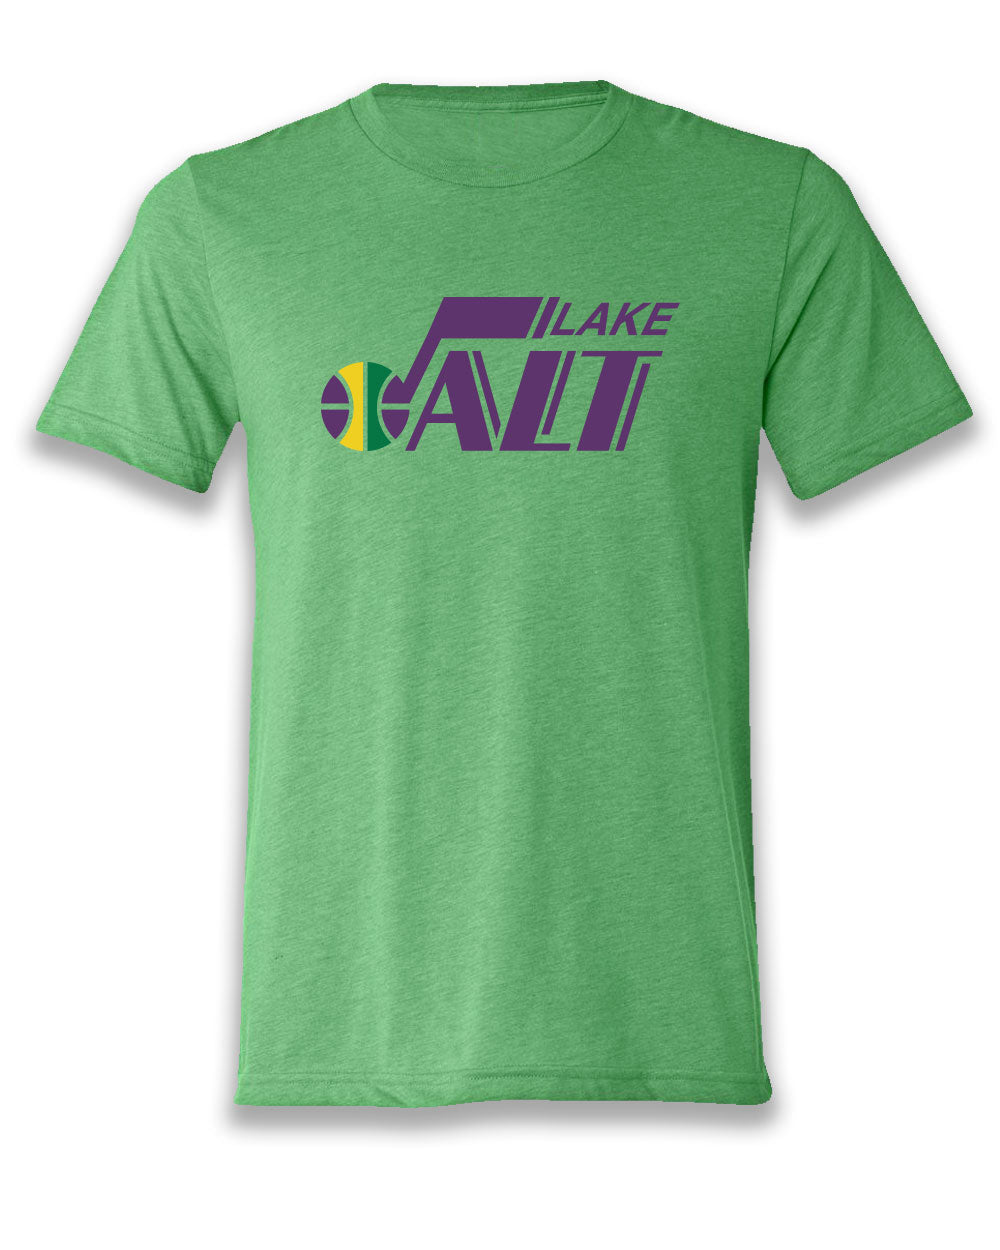 New Orleans Jazz Basketball Apparel Store